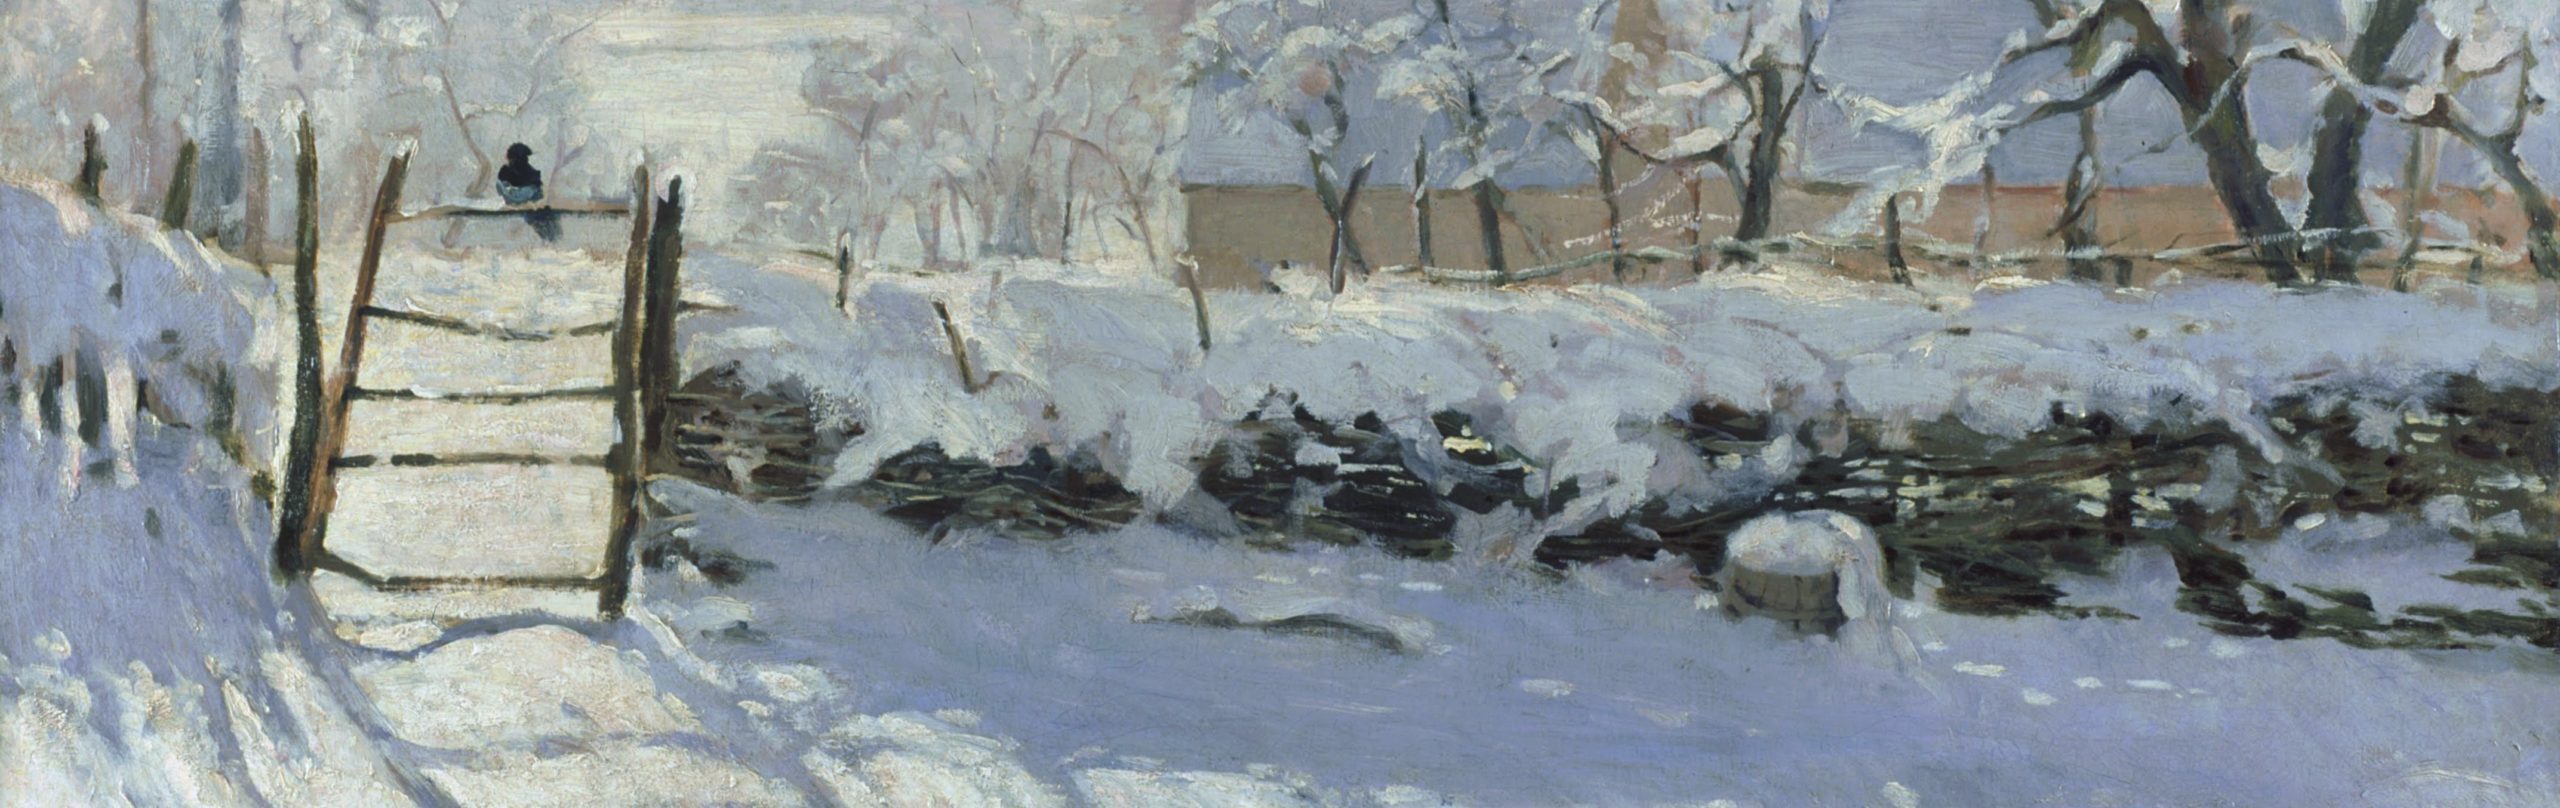 Monet’s magpie in the snow